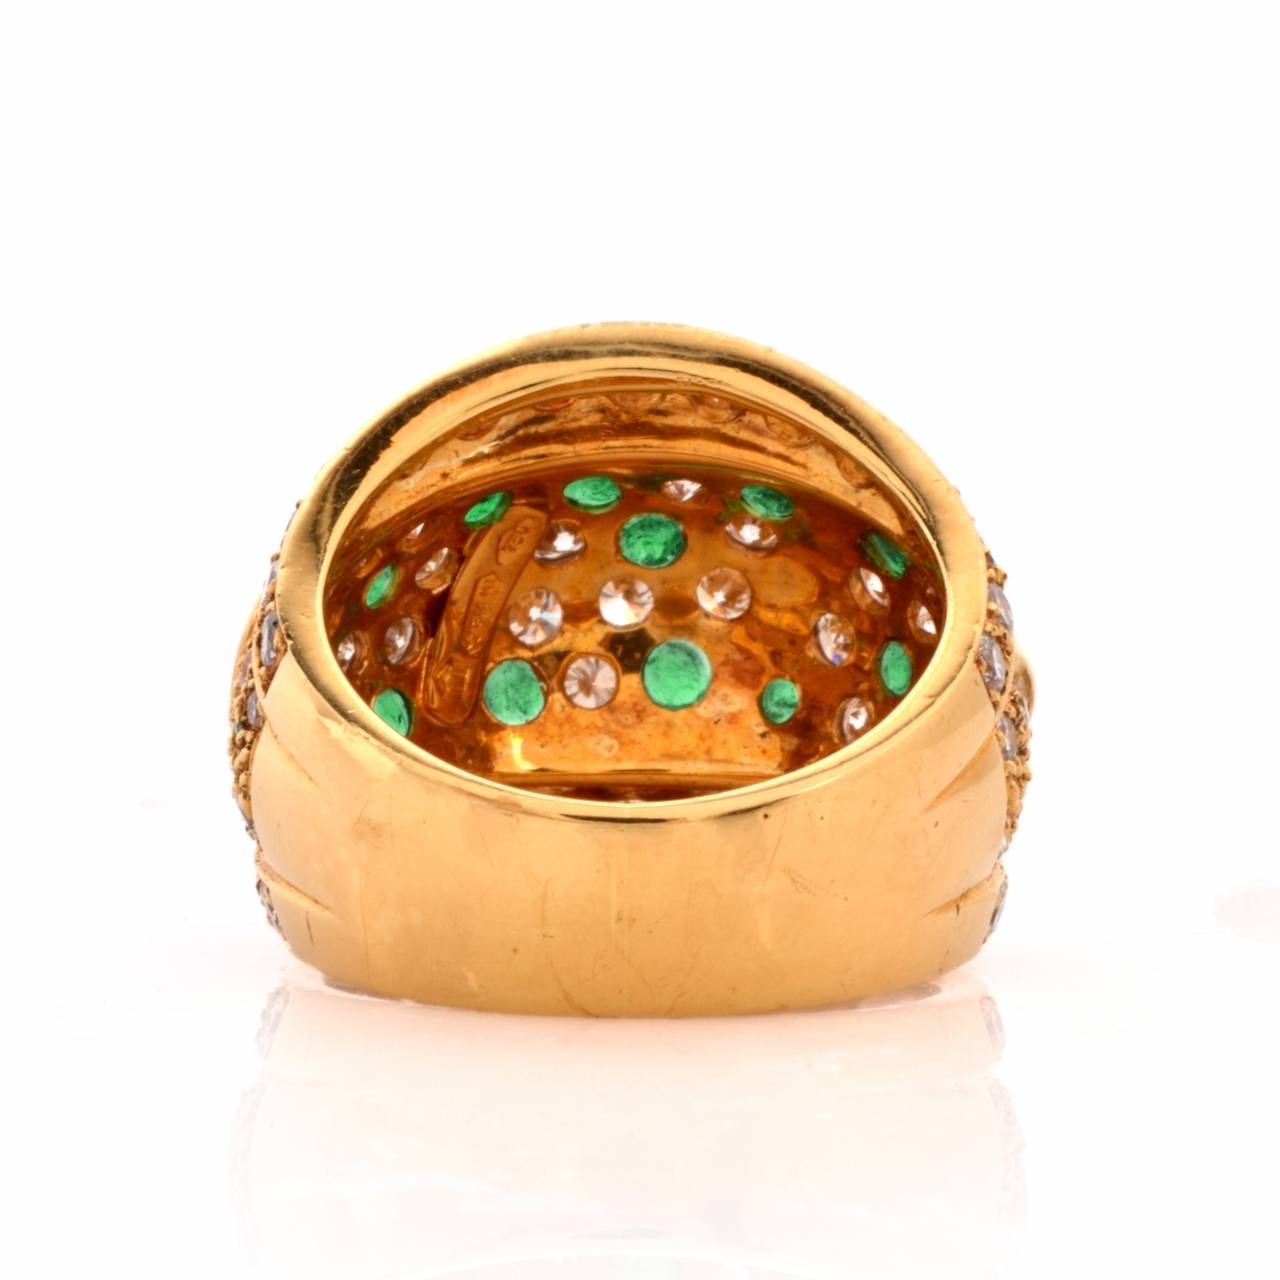 This captivating estate Retro cocktail ring  is crafted in elegantly matted and polished 18K yellow gold,  weighing approximately 13.2  grams and measuring 20 mm wide.   In classically distinct and  stylish design,  this alluring  ring incorporates